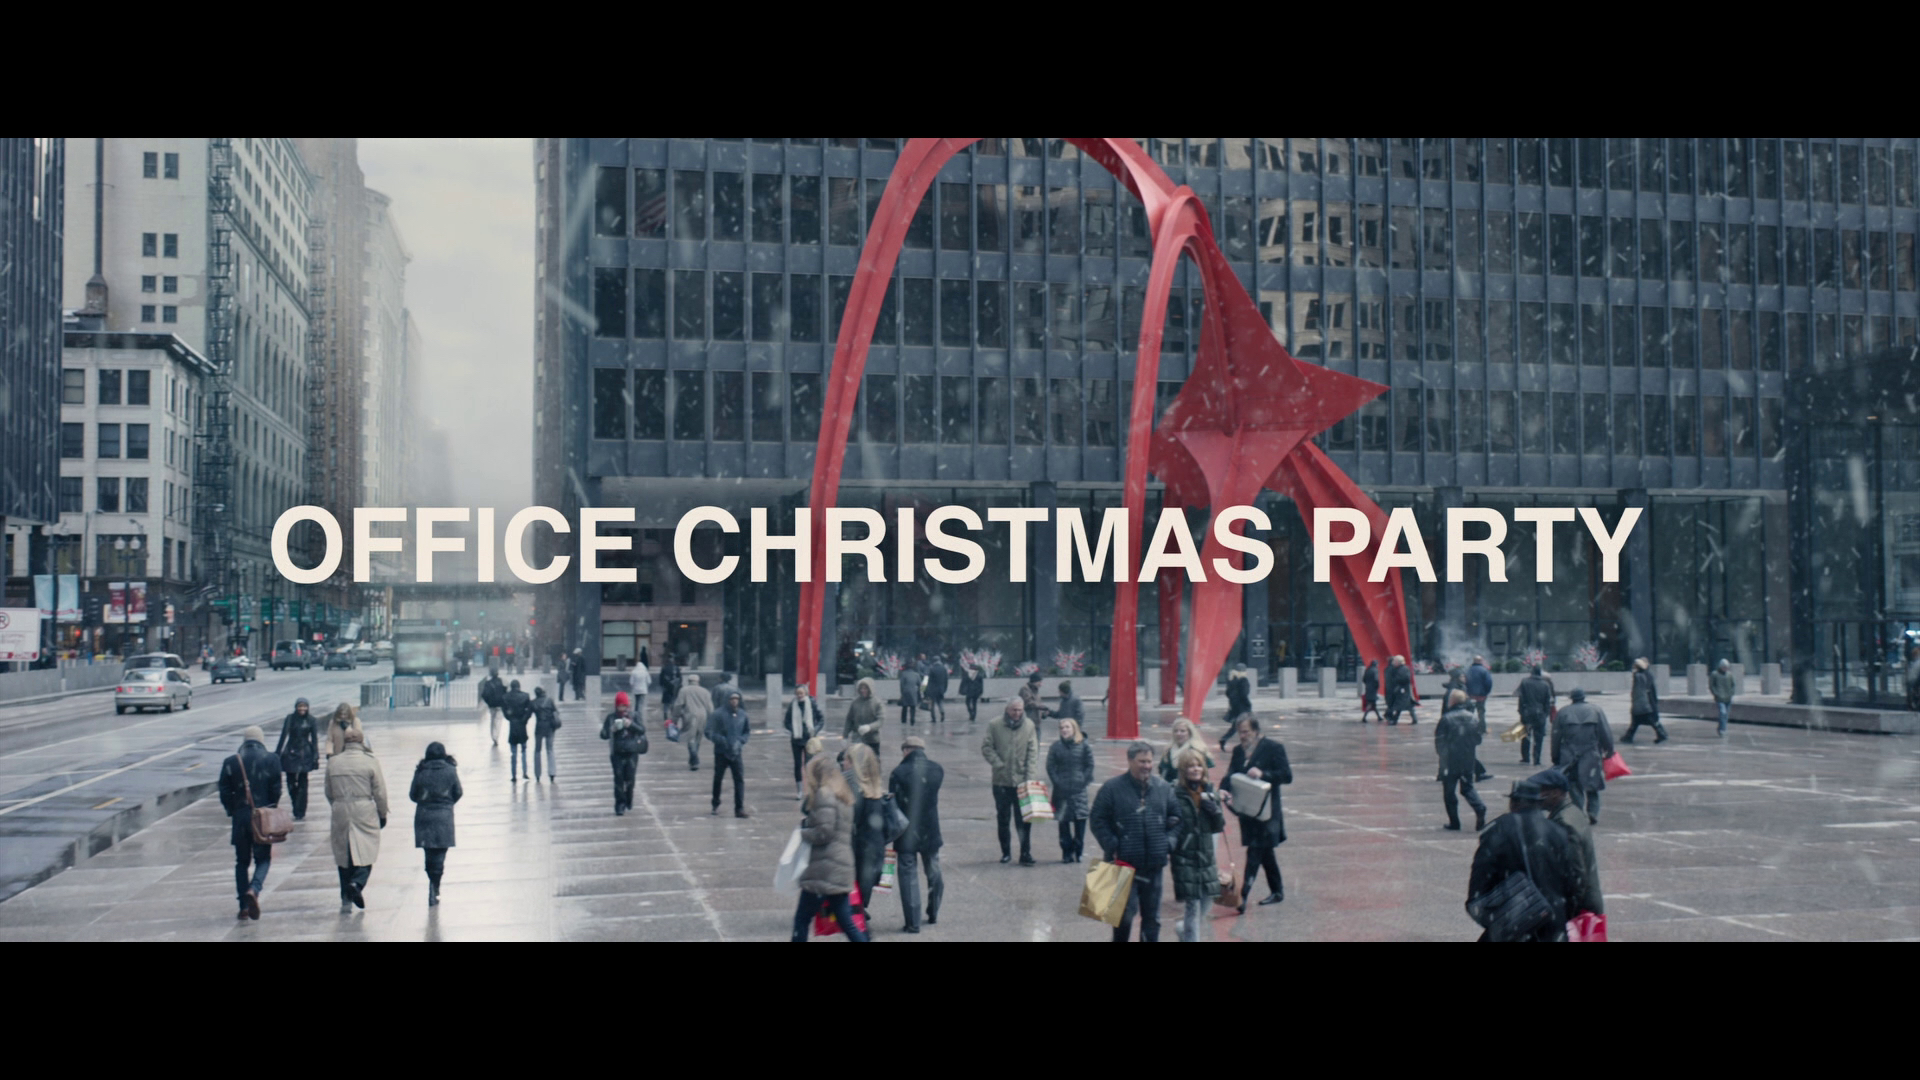 Office Christmas Party (Blu-ray) : DVD Talk Review of the Blu-ray